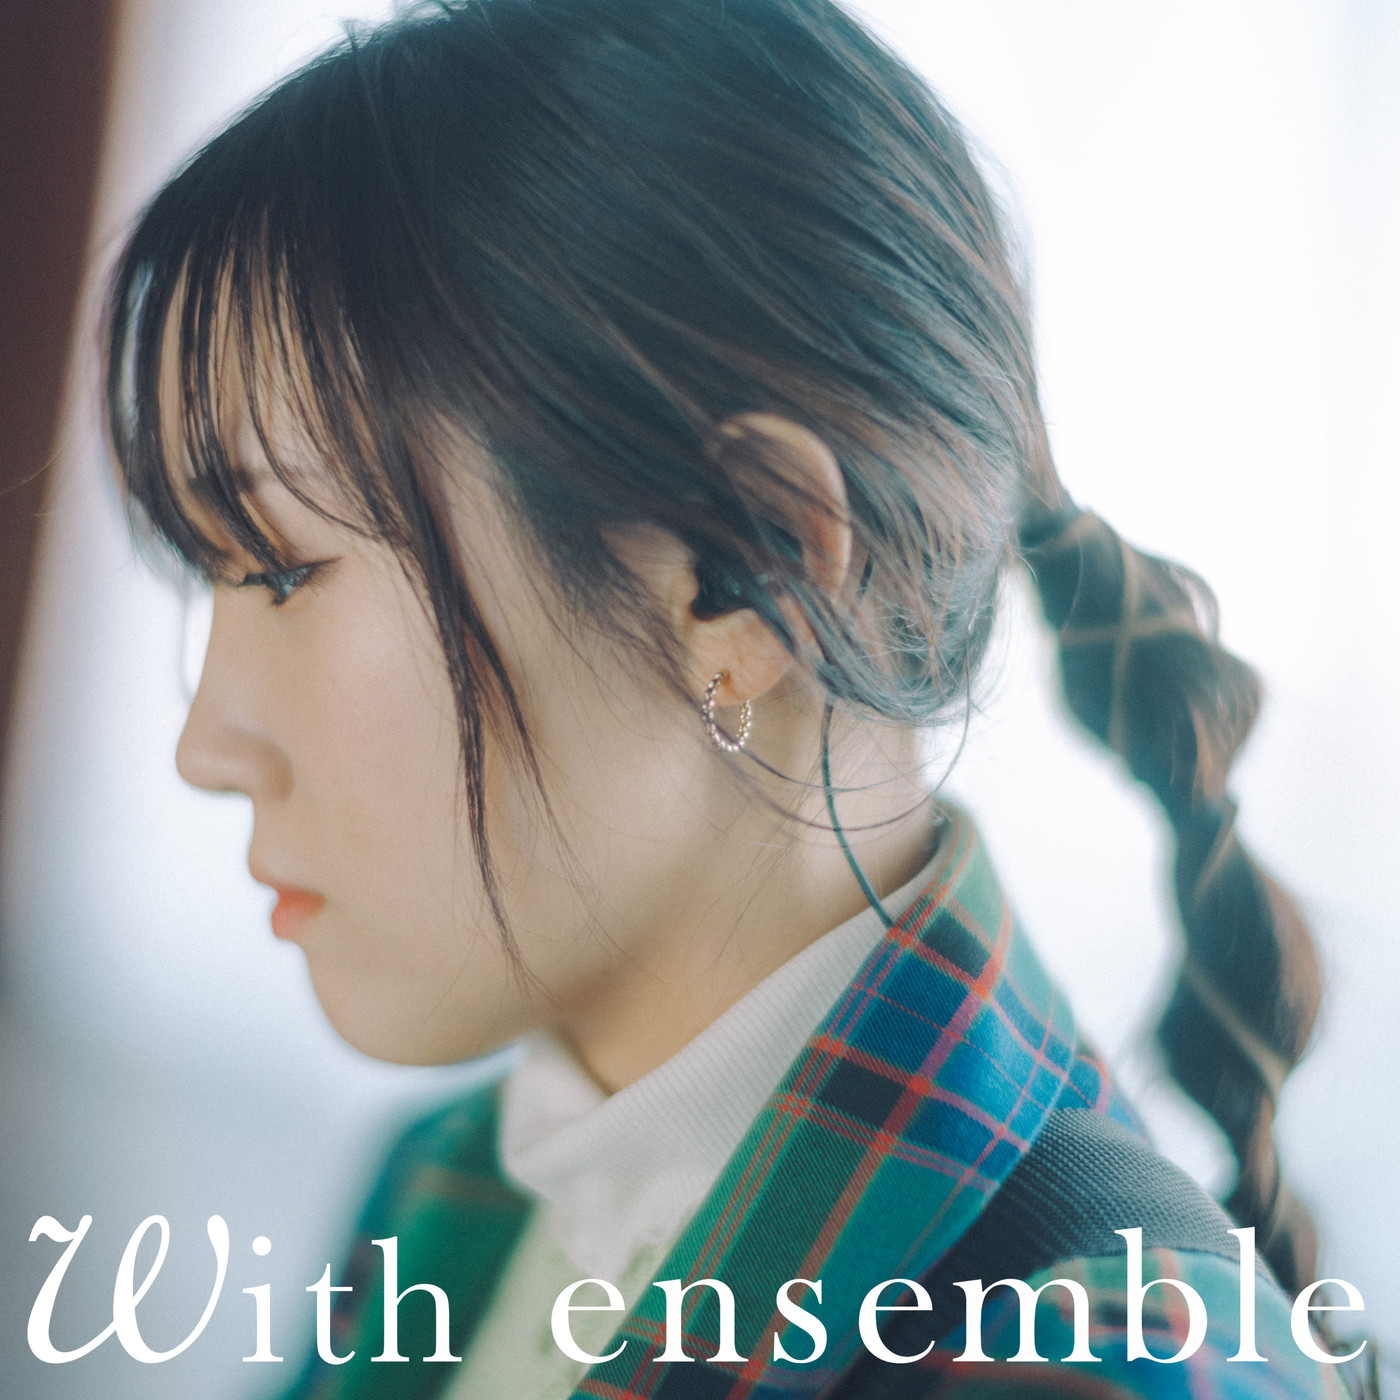 YouTubeチャンネル『With ensemble』よりWho-ya Extended、モノンクル、麗奈のパフォーマンス音源全8曲が配信決定 - 画像一覧（2/8）